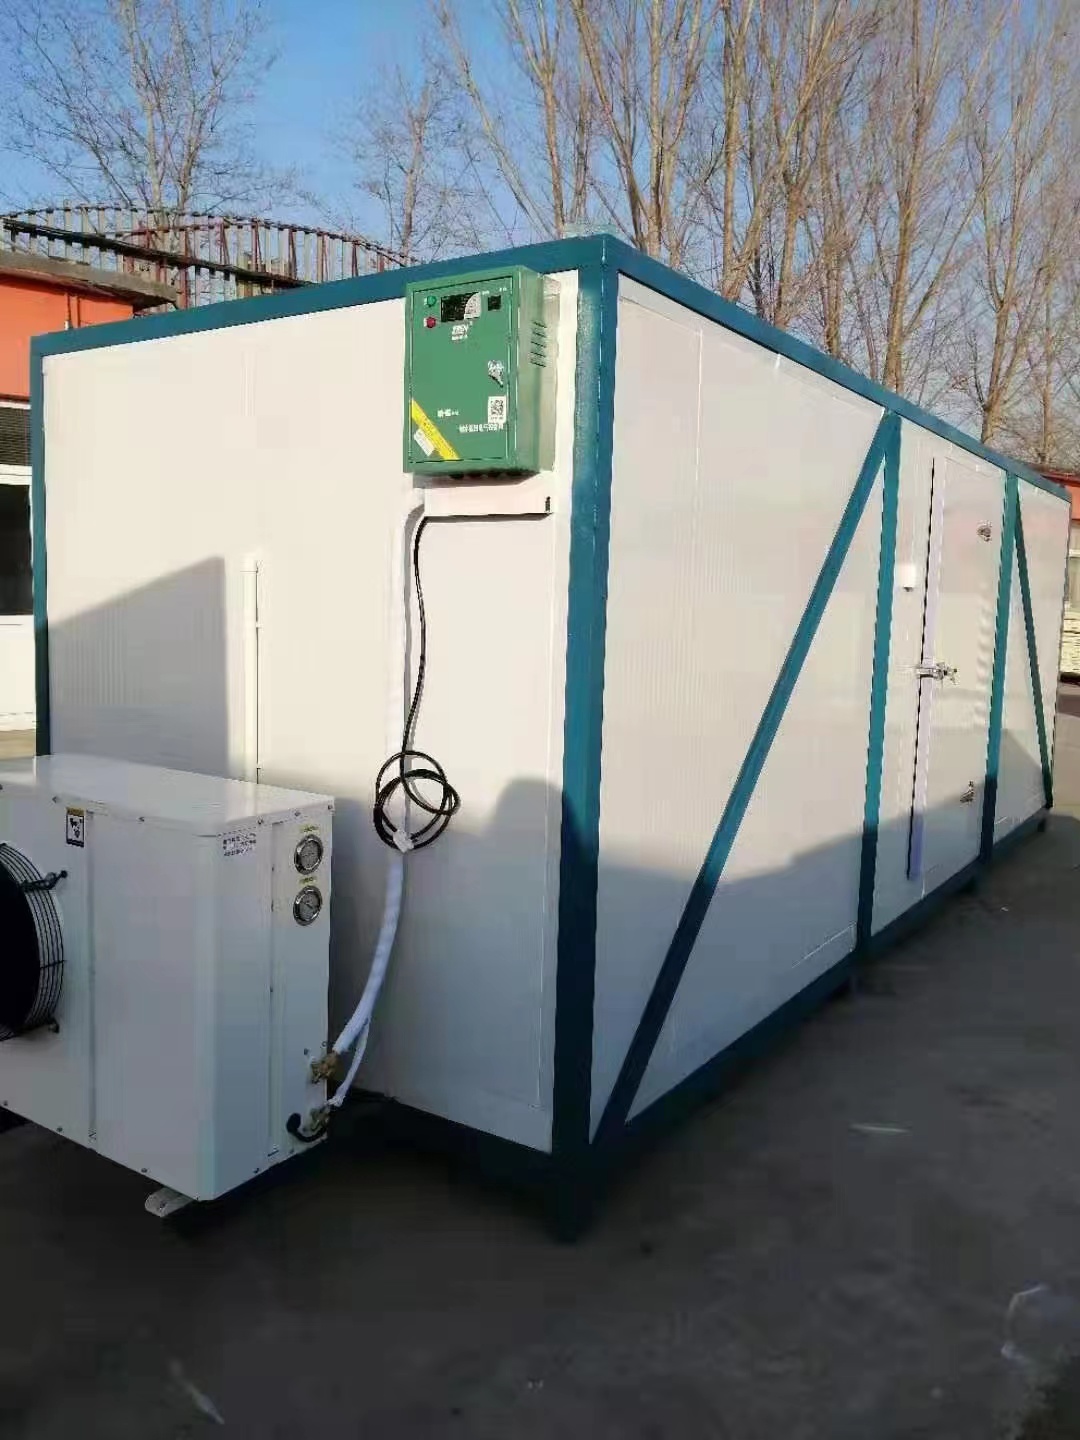 China First Cold Chain Cool Room with Frascold Refrigerator Compressor Unit for Food Stroage 